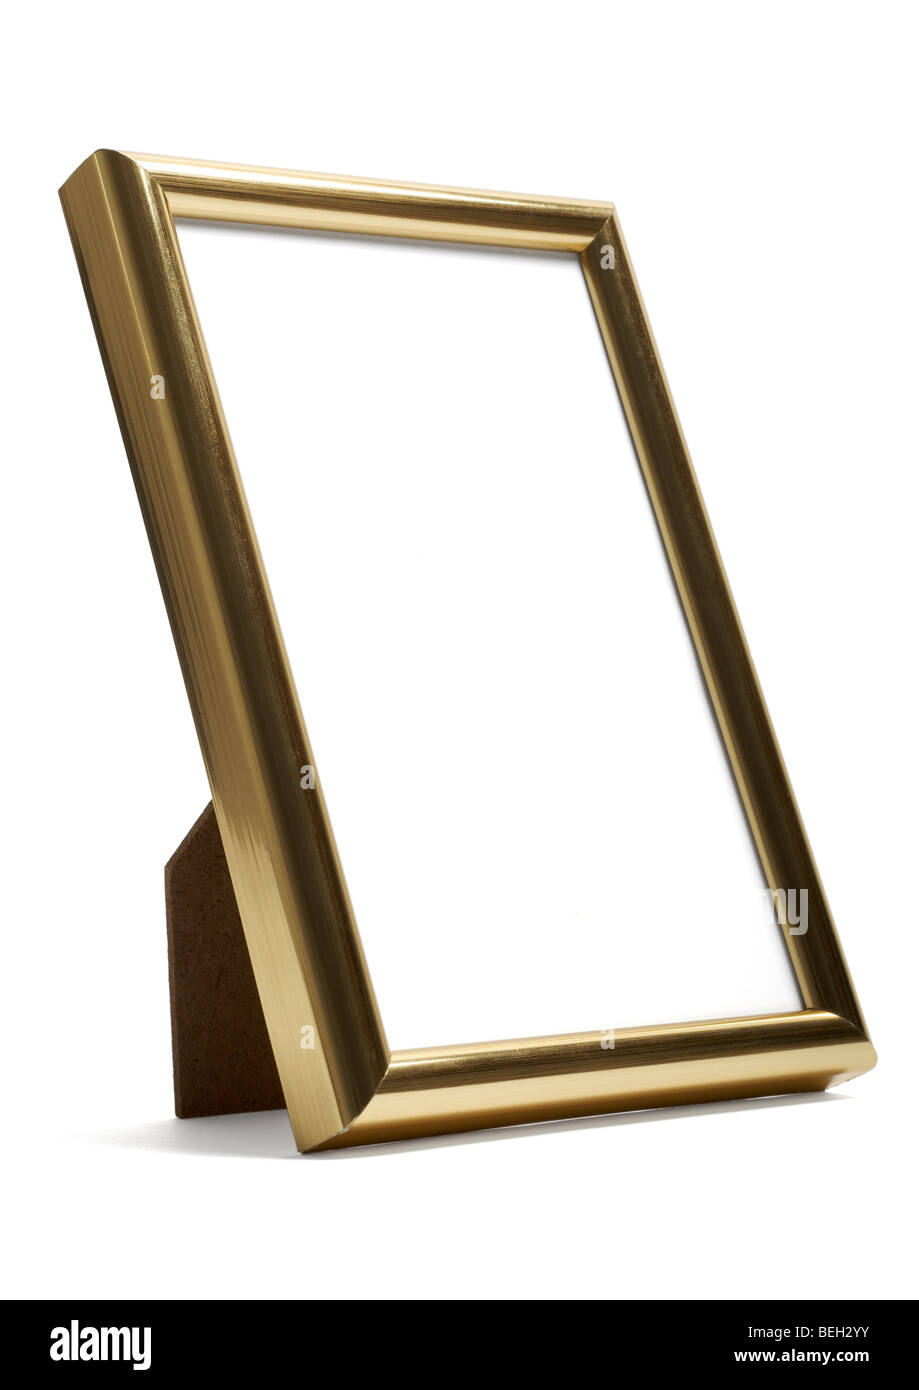 Gold picture frame on white background Stock Photo